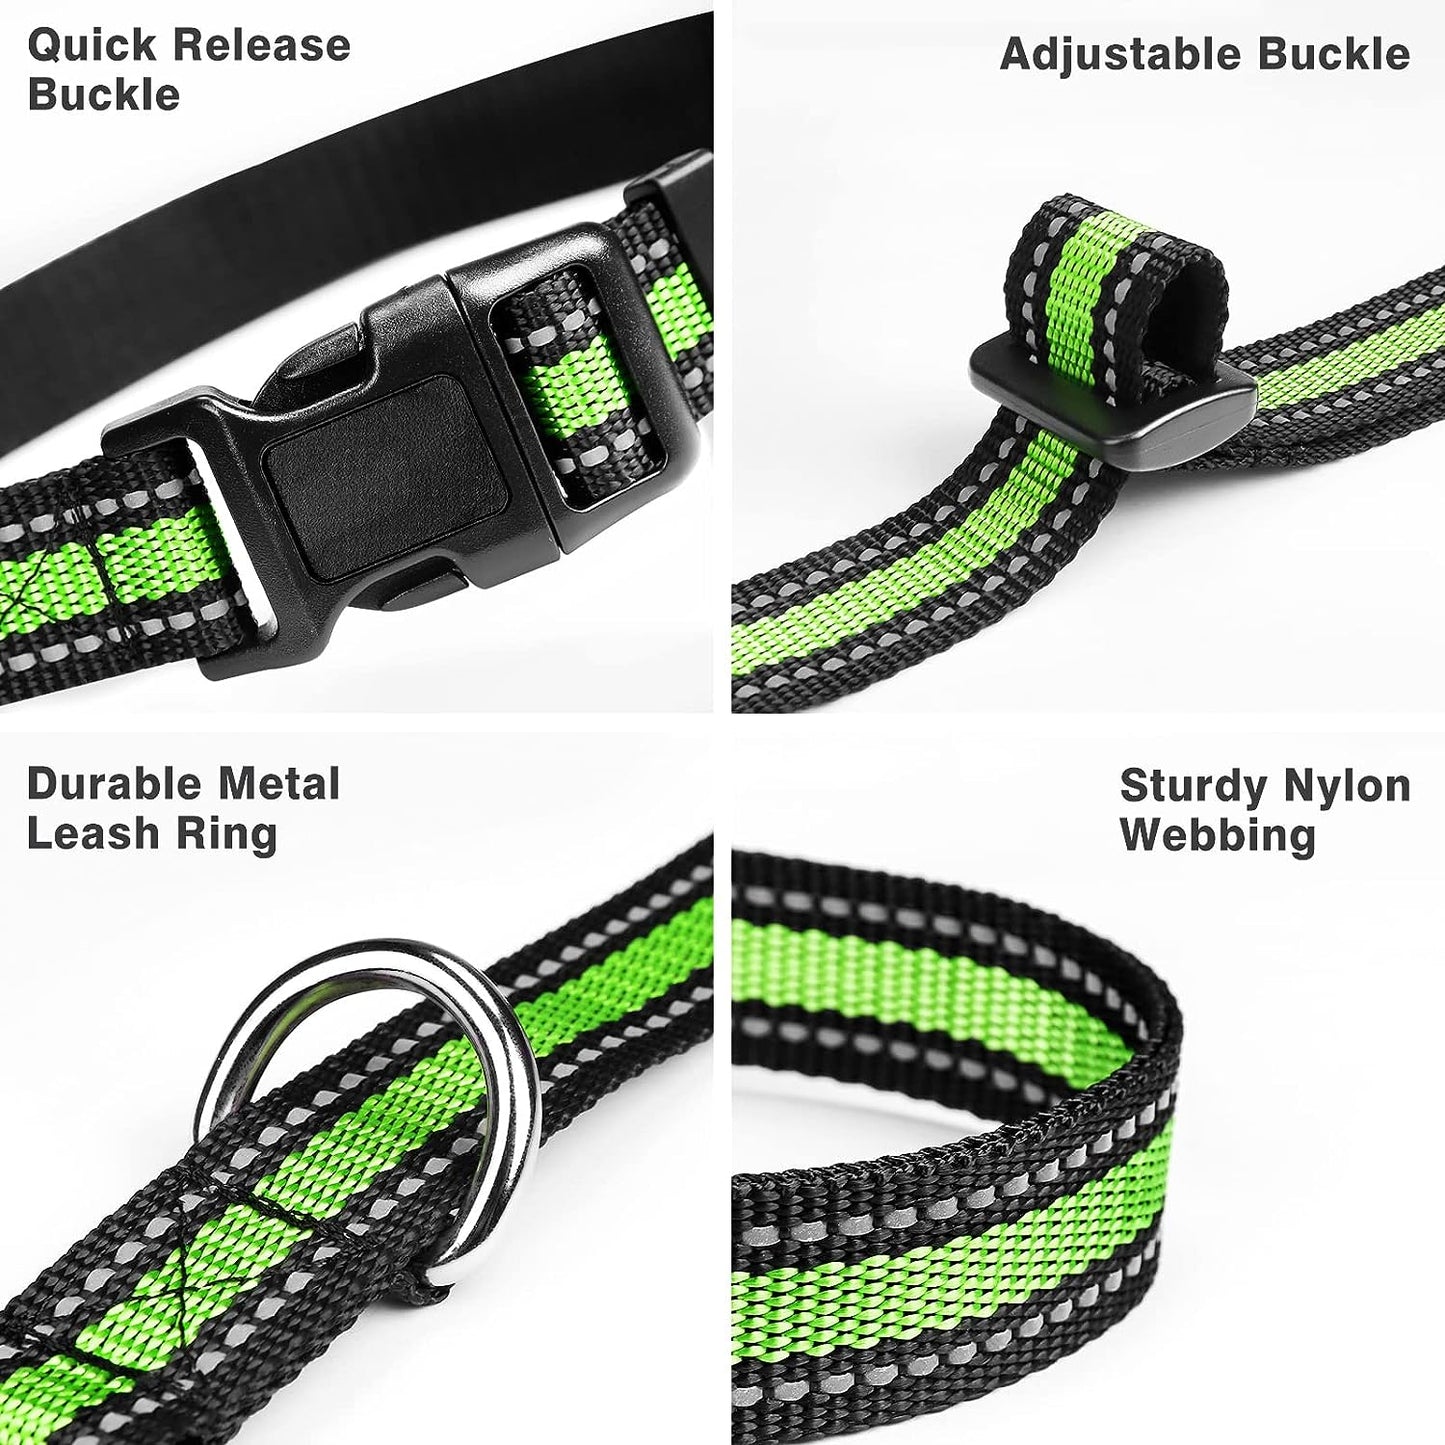 Airtag Dog Collar, Reflective Nylon Pet Collar with Silicone Case for Apple Airtags, Cute Bowtie Pet Airtag Holder for Puppy Small Medium Large and Extra-Large Dogs (Green, XS: 8"-12" Neck)